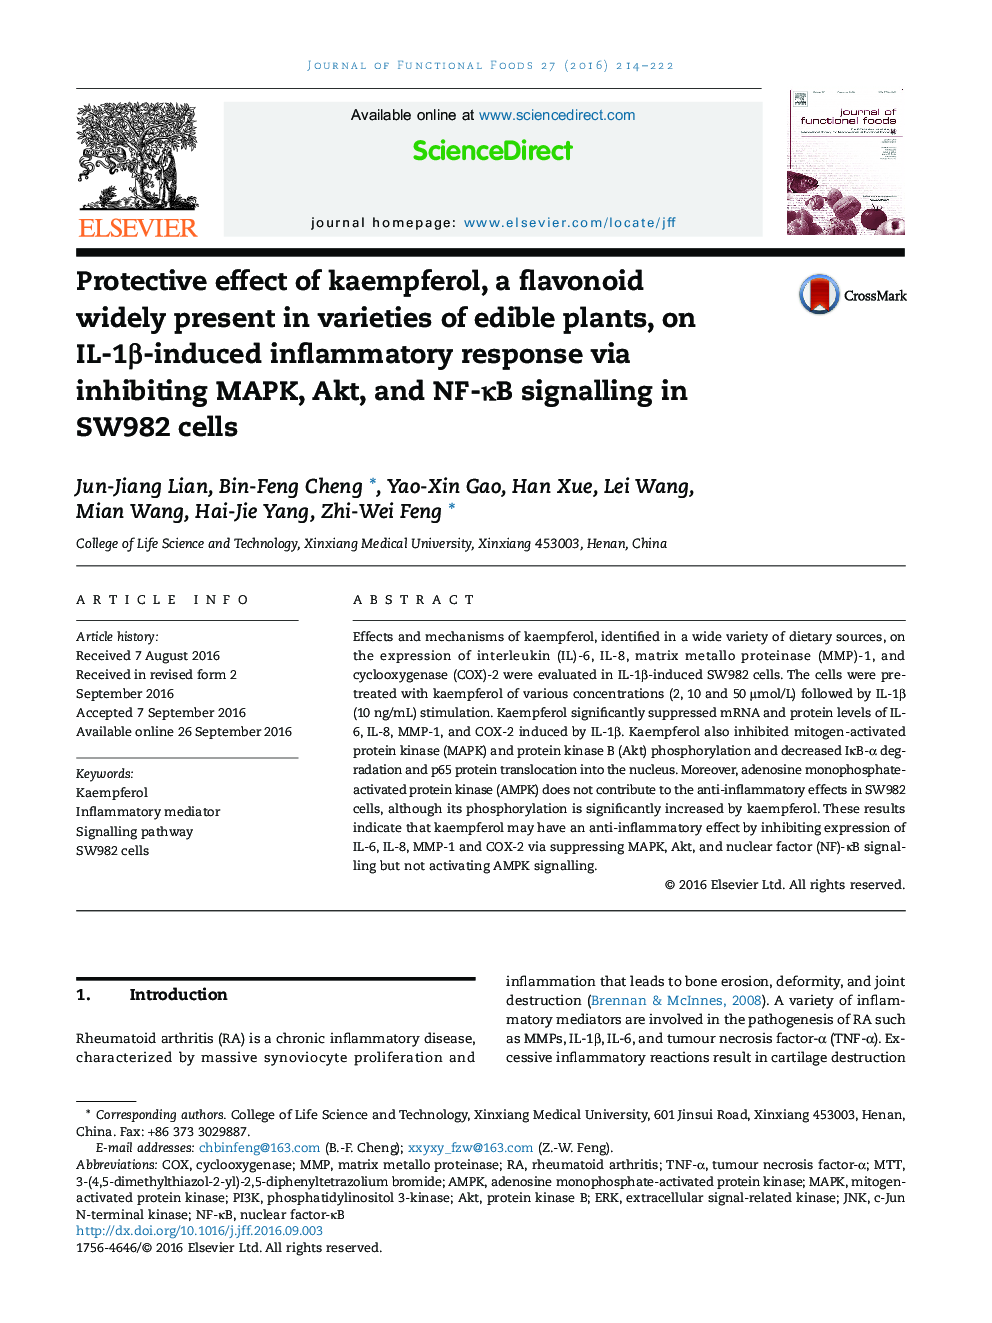 Protective effect of kaempferol, a flavonoid widely present in varieties of edible plants, on IL-1Î²-induced inflammatory response via inhibiting MAPK, Akt, and NF-ÎºB signalling in SW982 cells